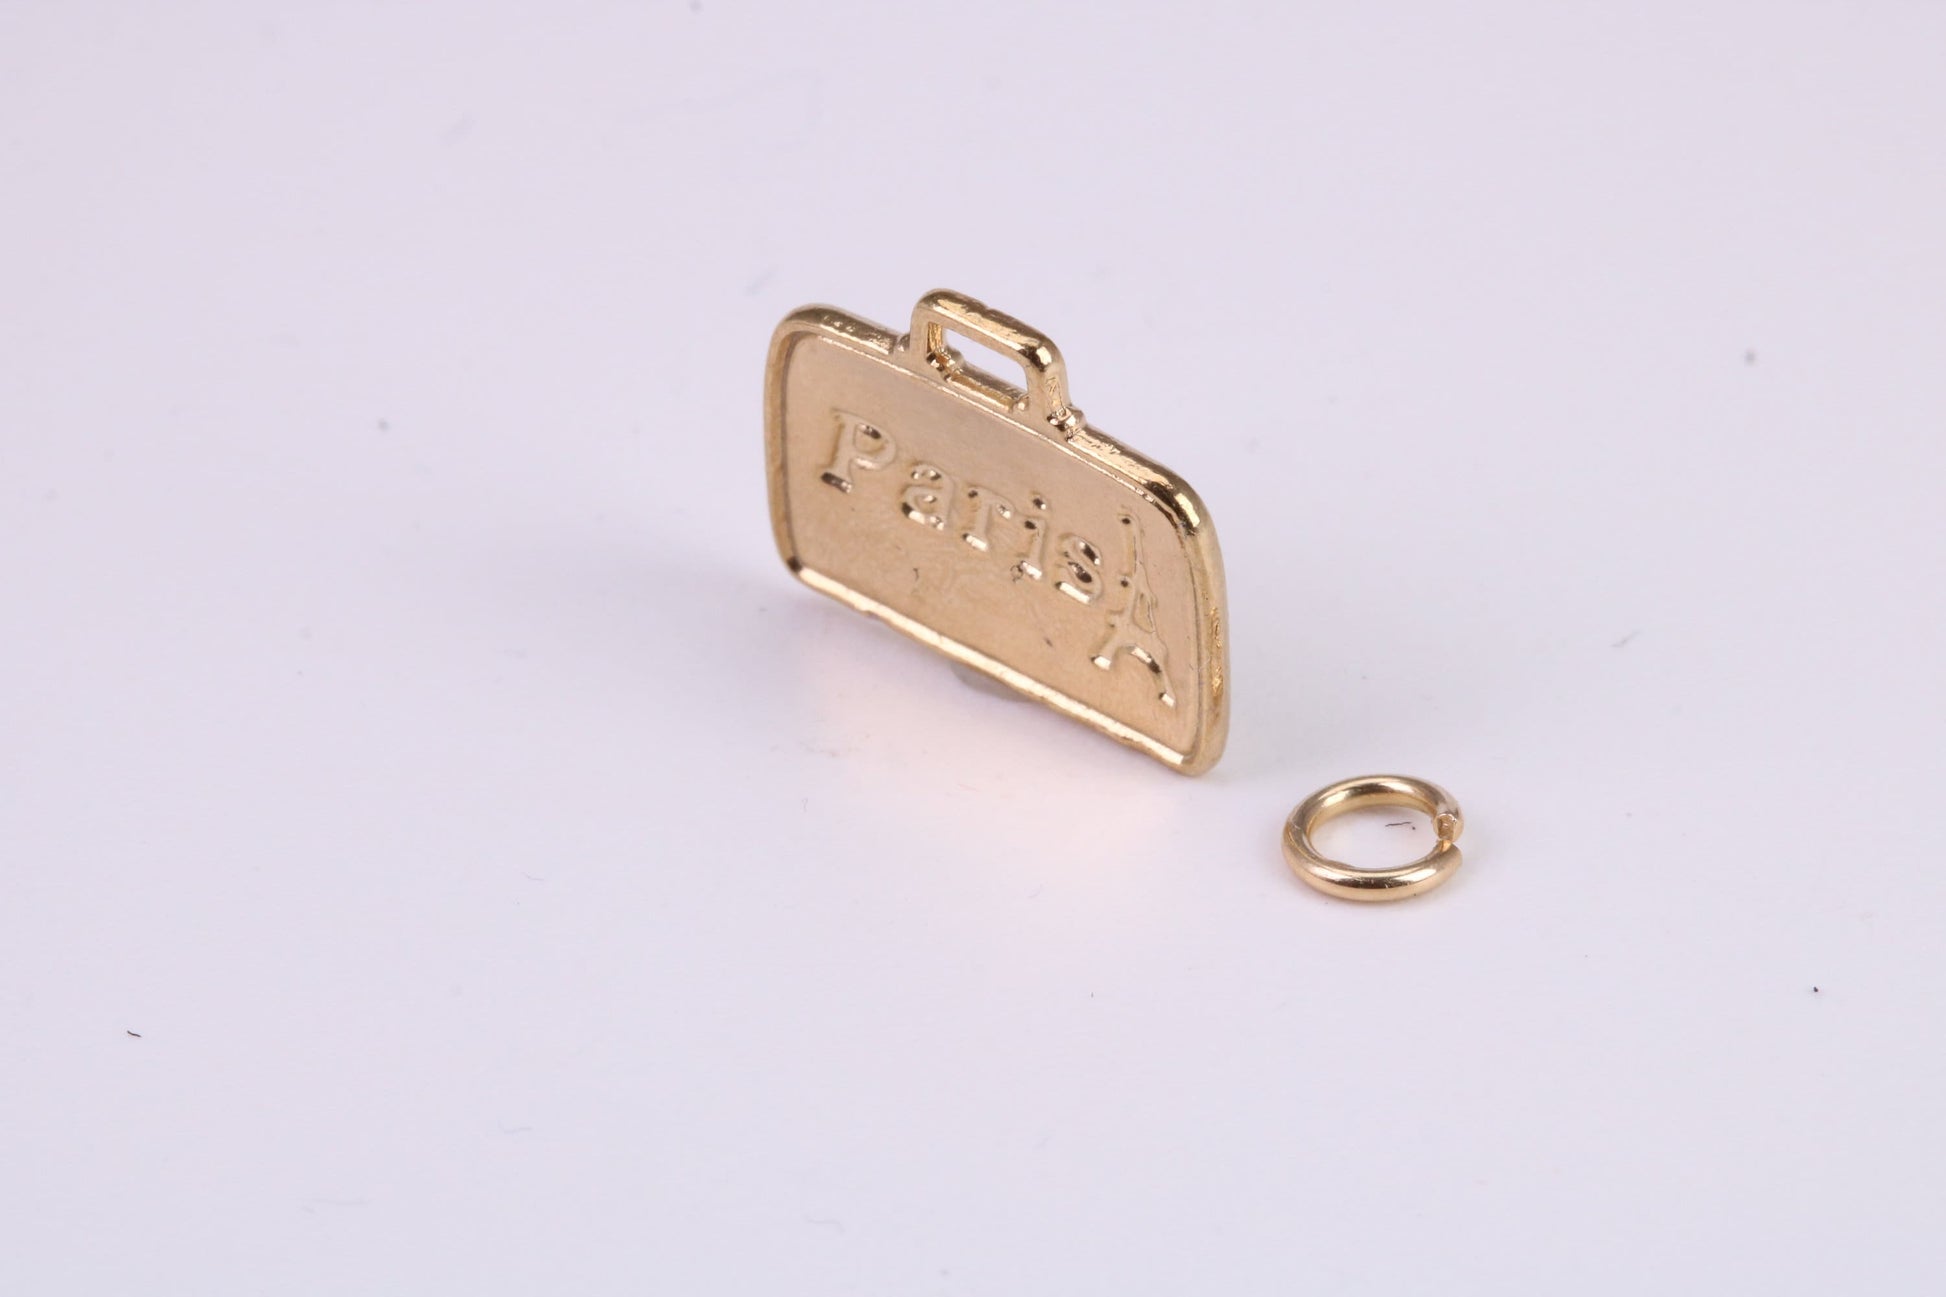 Travel Suitcase Charm, Traditional Charm, Made From Solid Yellow Gold with British Hallmark, Complete with Attachment Link